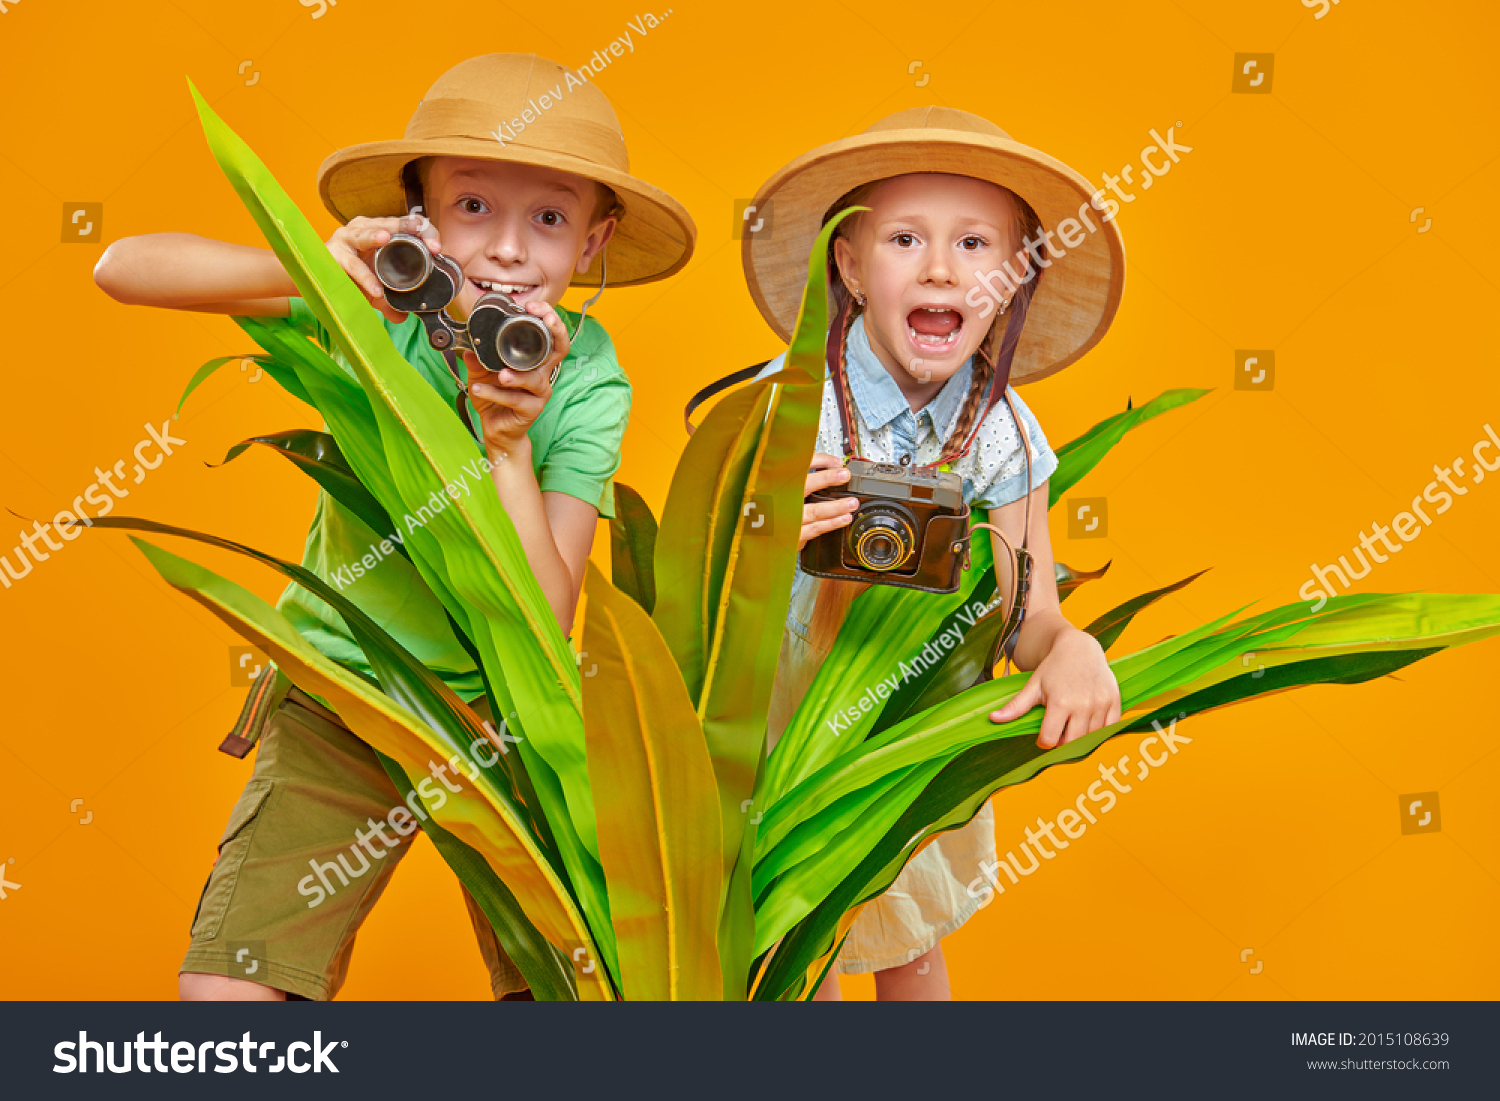 Young travelers, a girl and a boy, explore nature, they look out from behind palm leaves with binoculars and a camera. Summer vacation, tourism. Studio portrait on a yellow background.  #2015108639